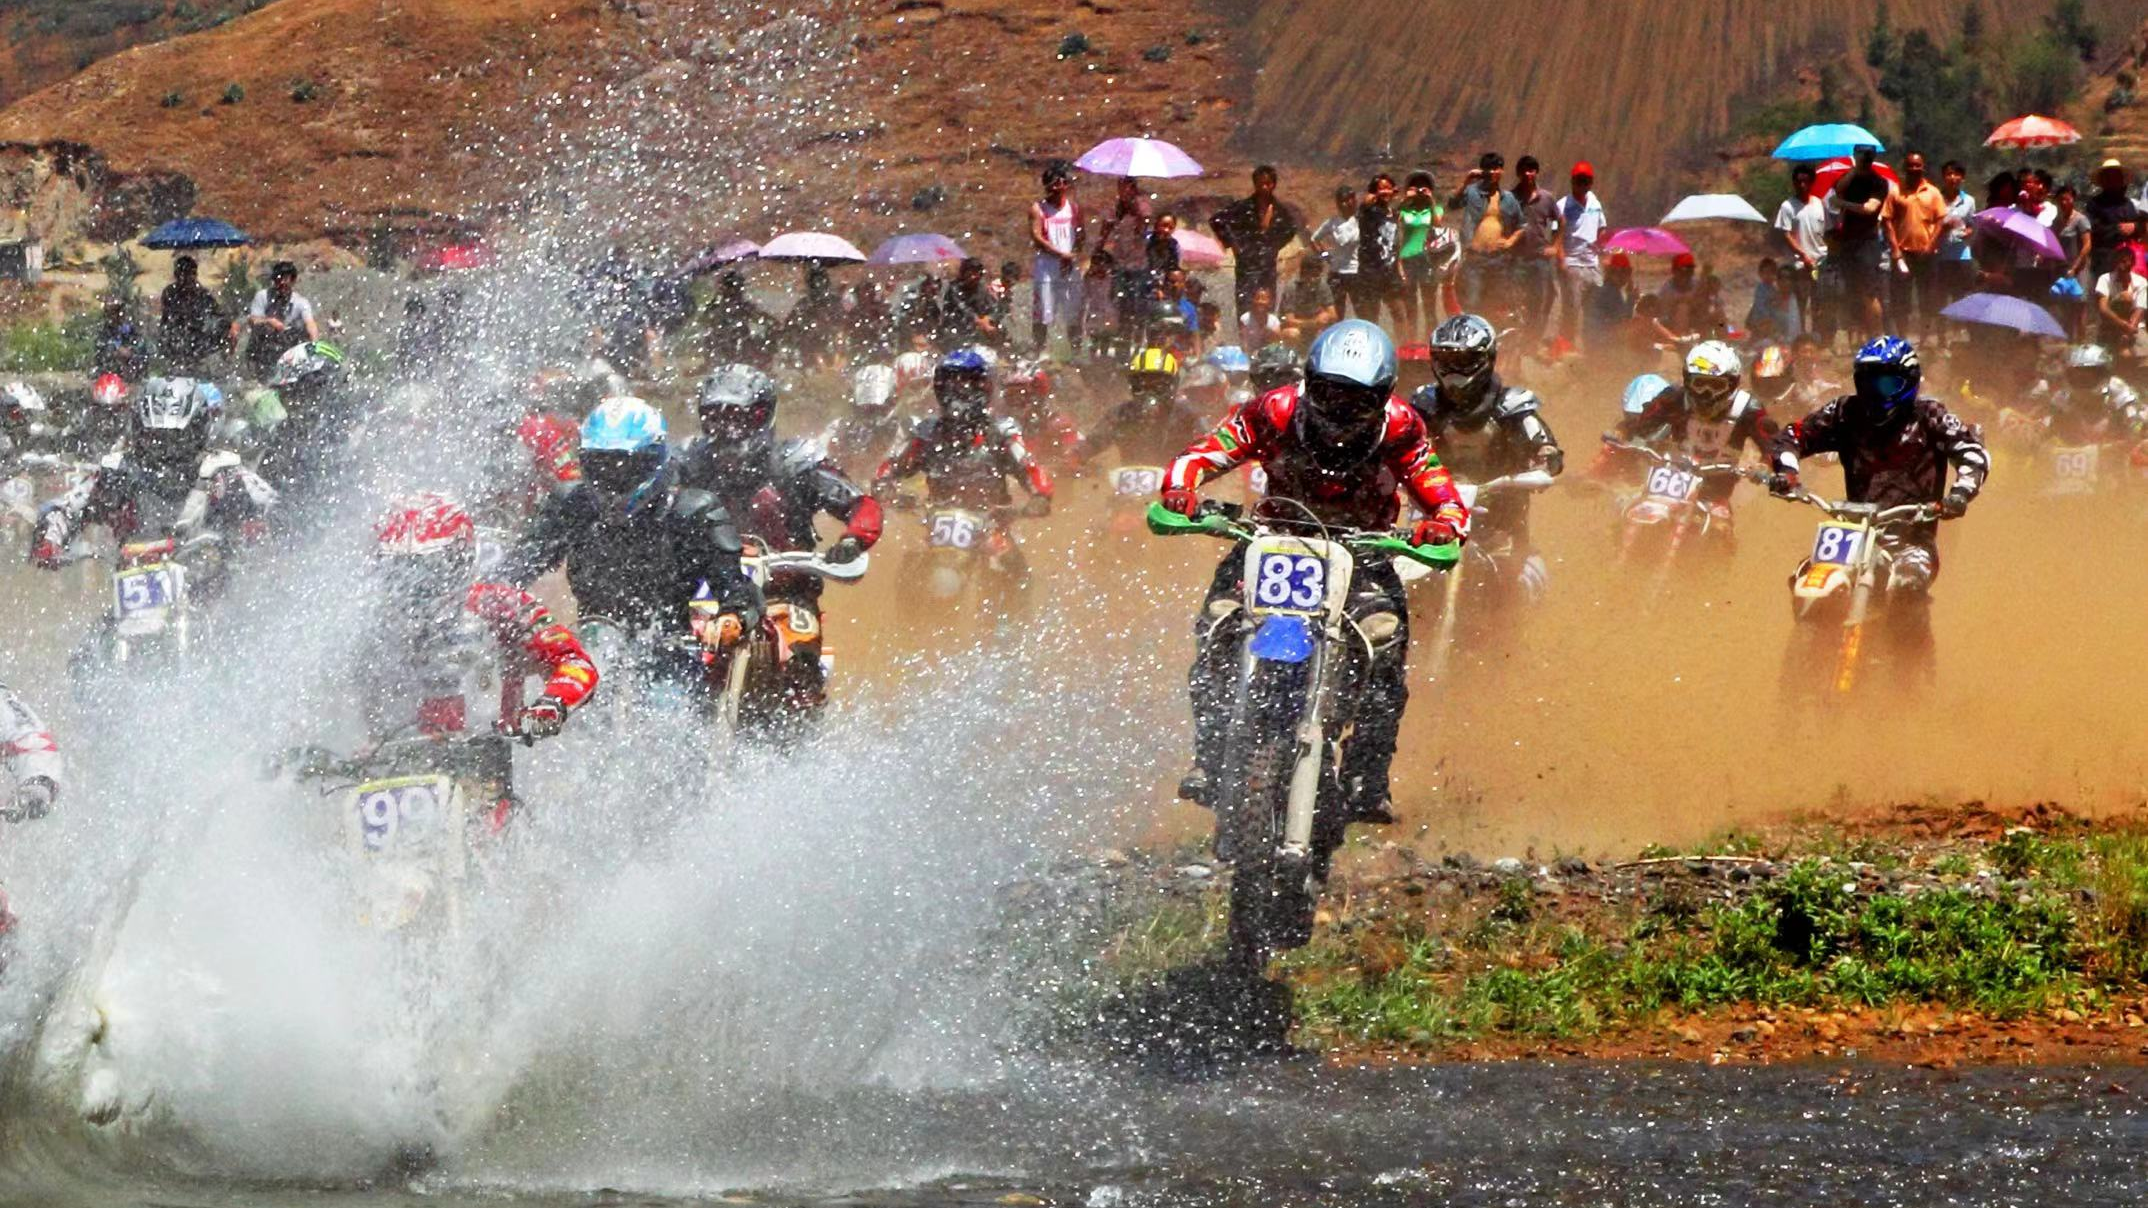 Live: Come and feel the fast and furious motorcycle race in SW China